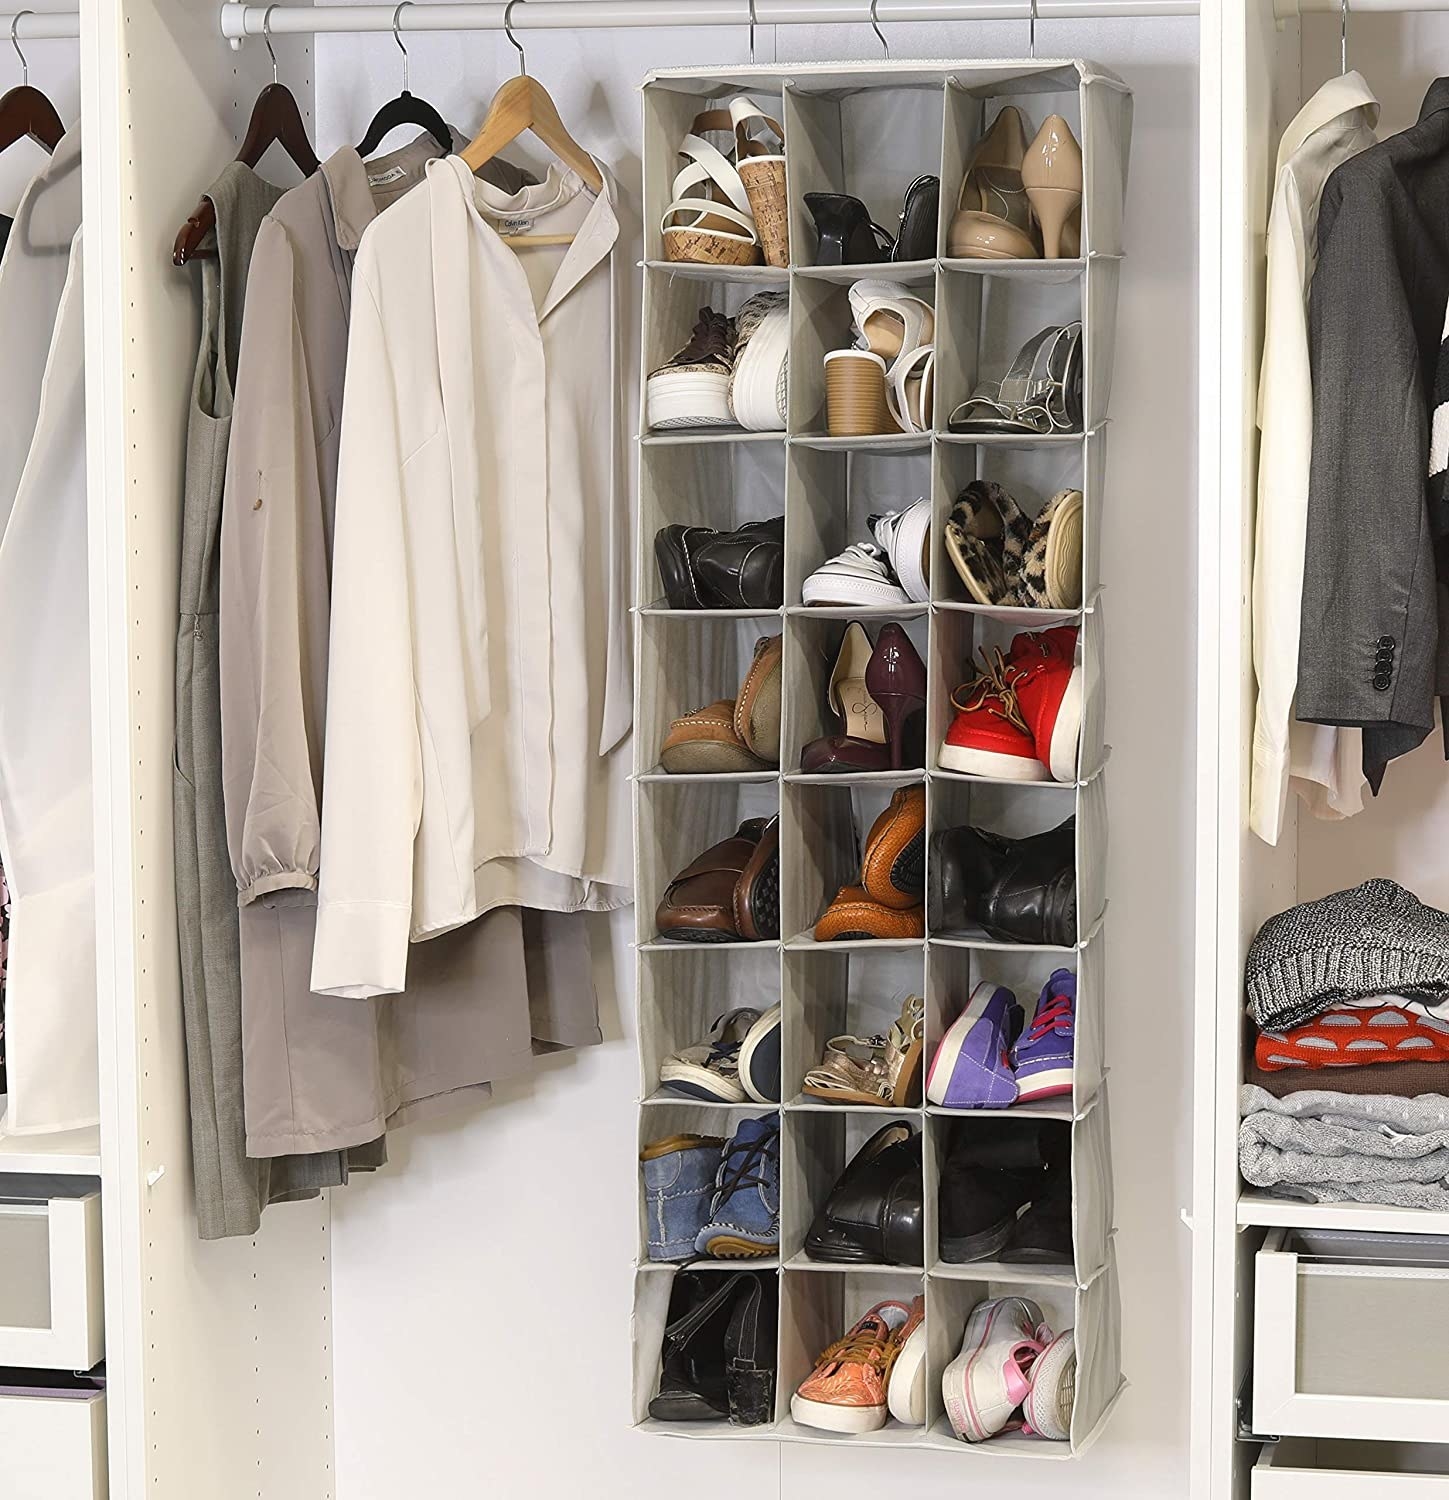 A large 24-compartment hanging shoe rack installed in a closet